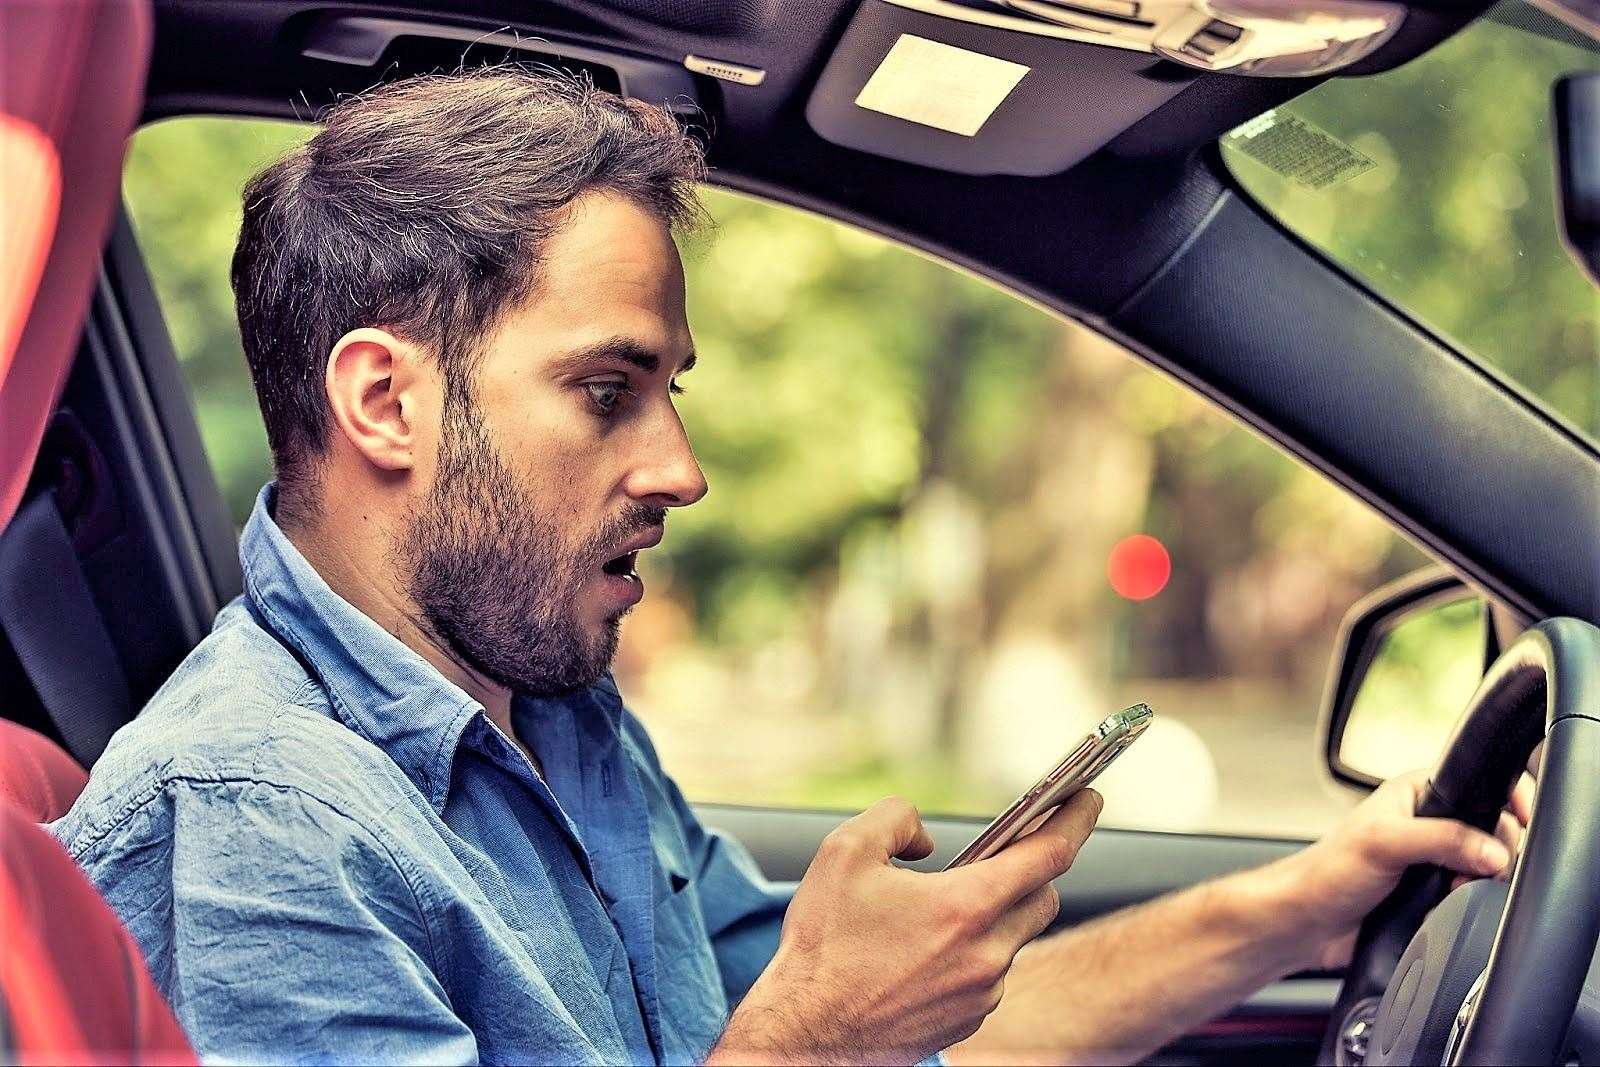 Drivers are warned not to be distracted on the road when the alert sounds on their device. Credit: ShutterStock